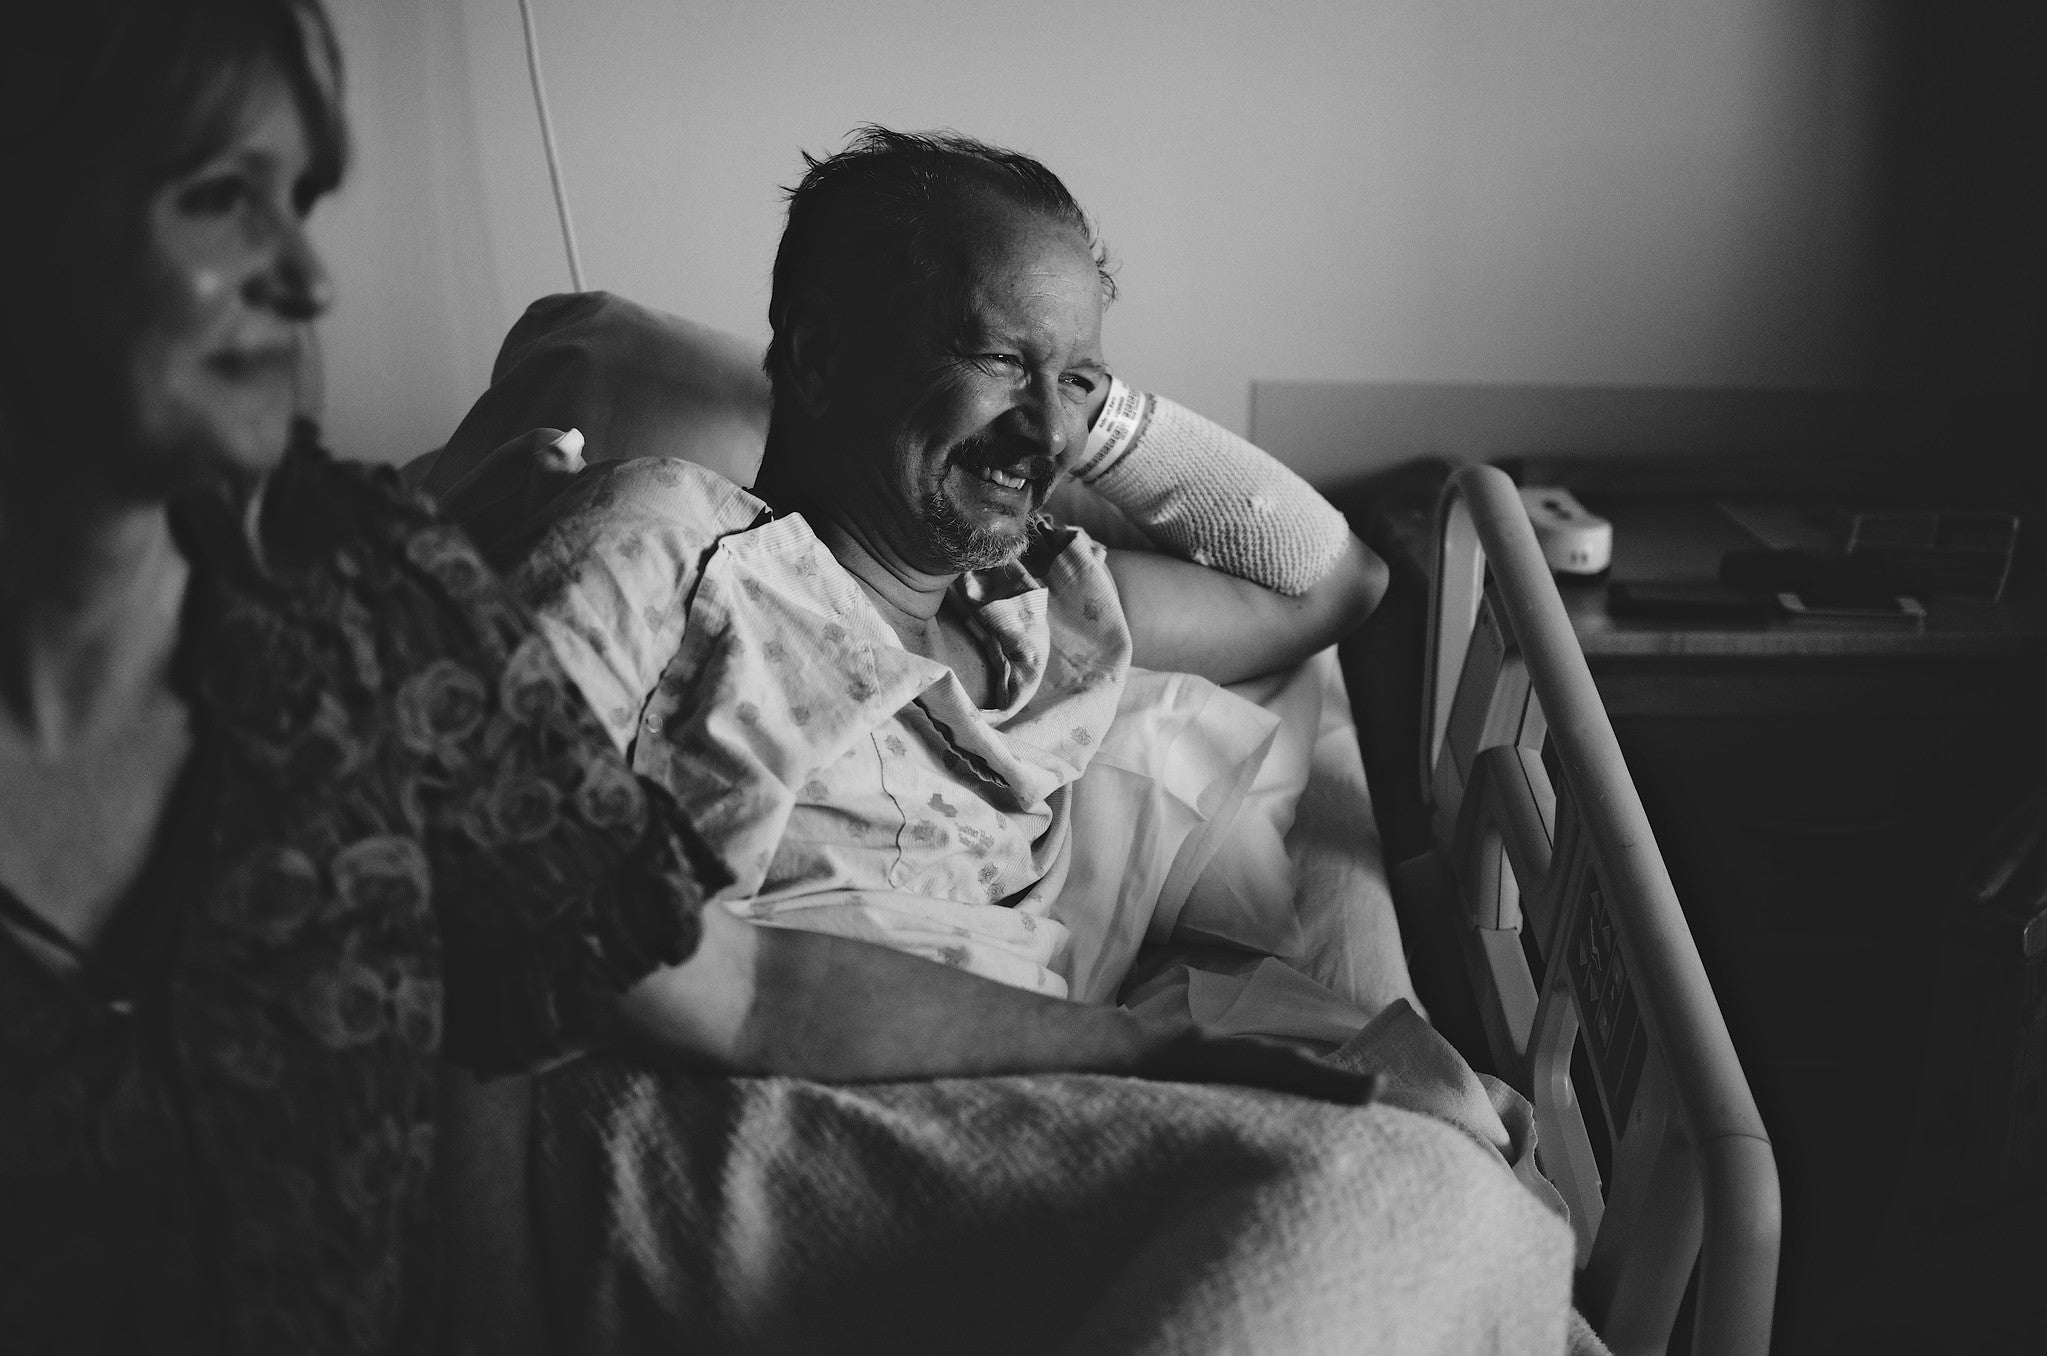 Black and white photograph of patient in a hospital bed with a woman from his family (maybe his wife) on his side